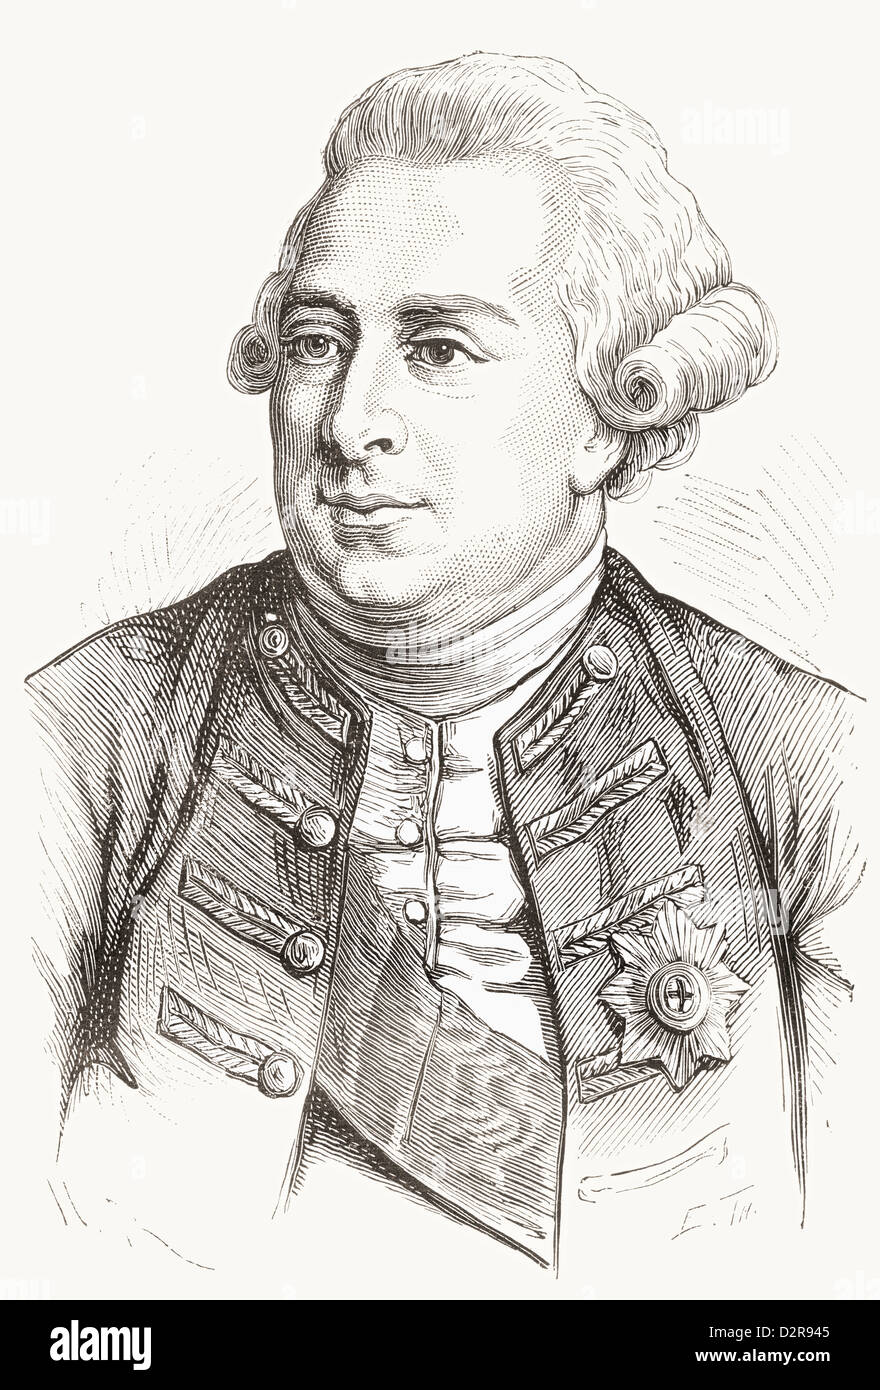 George III, 1738 - 1820. King of the United Kingdom of Great Britain and Ireland. Stock Photo